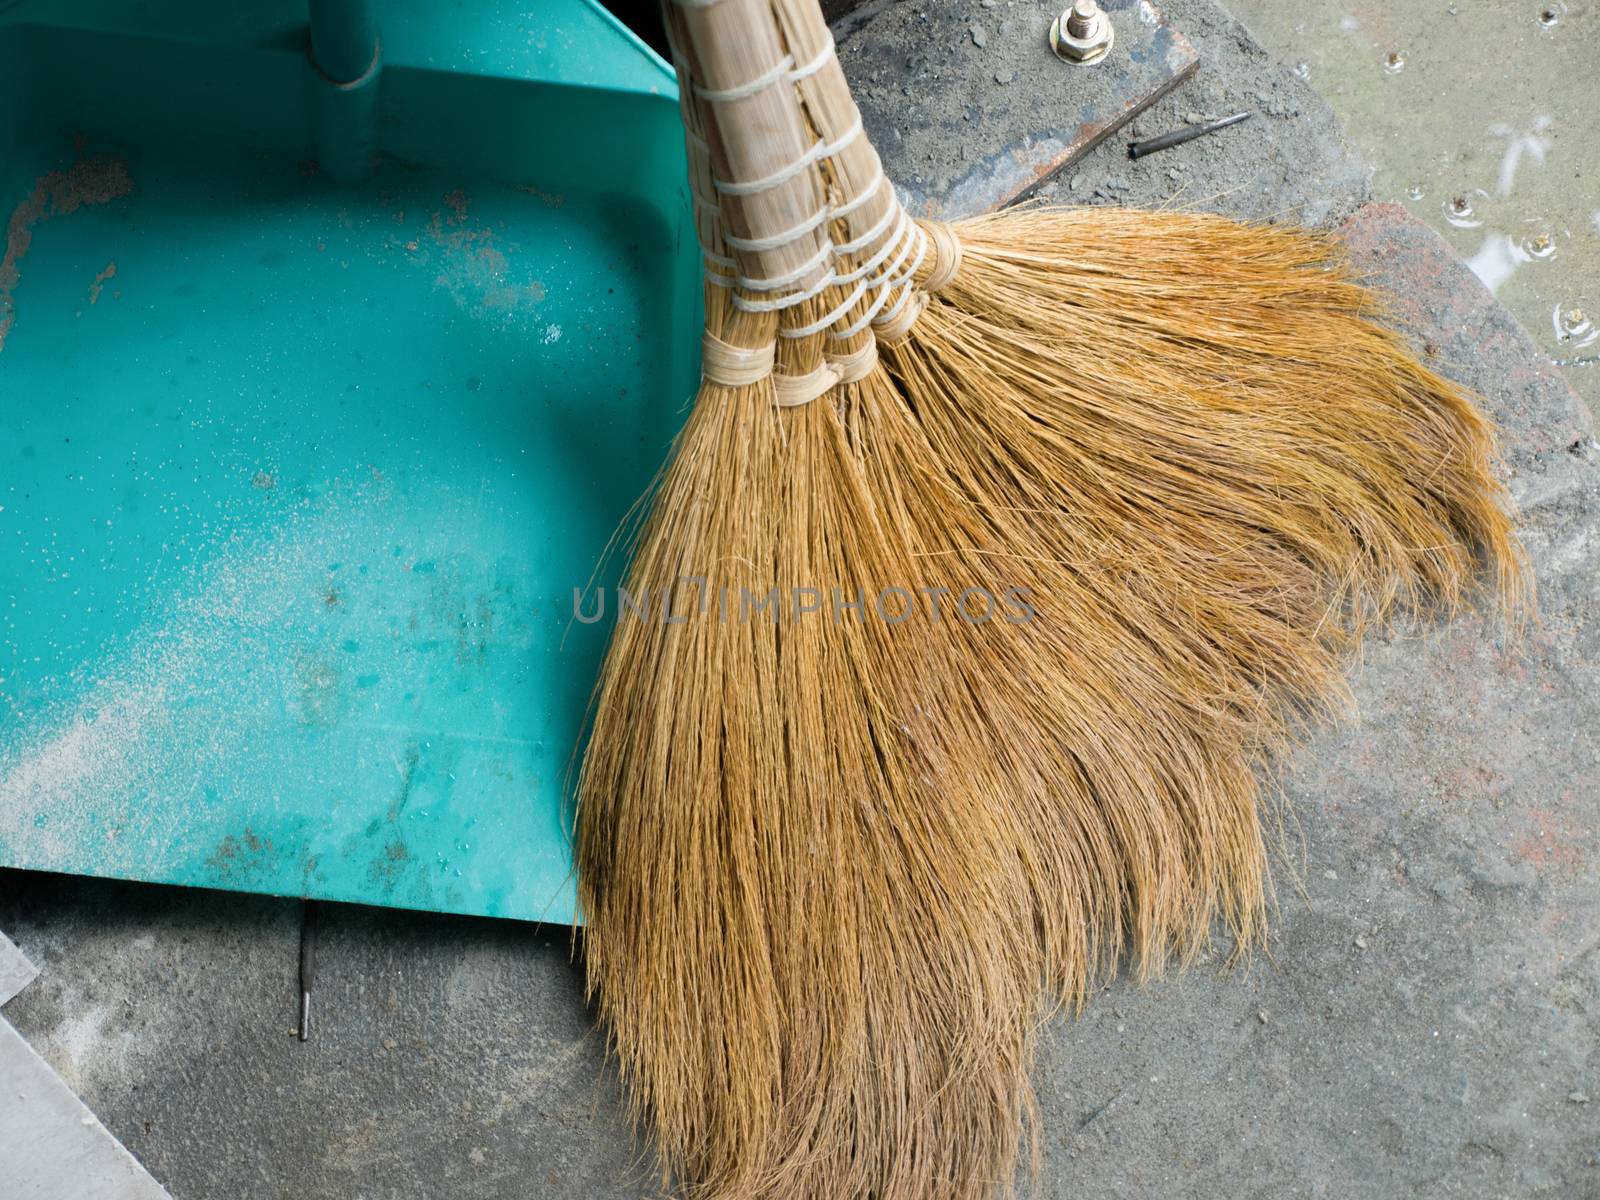 TYPICAL SOFT BROOM AND DUSTPAN by PrettyTG